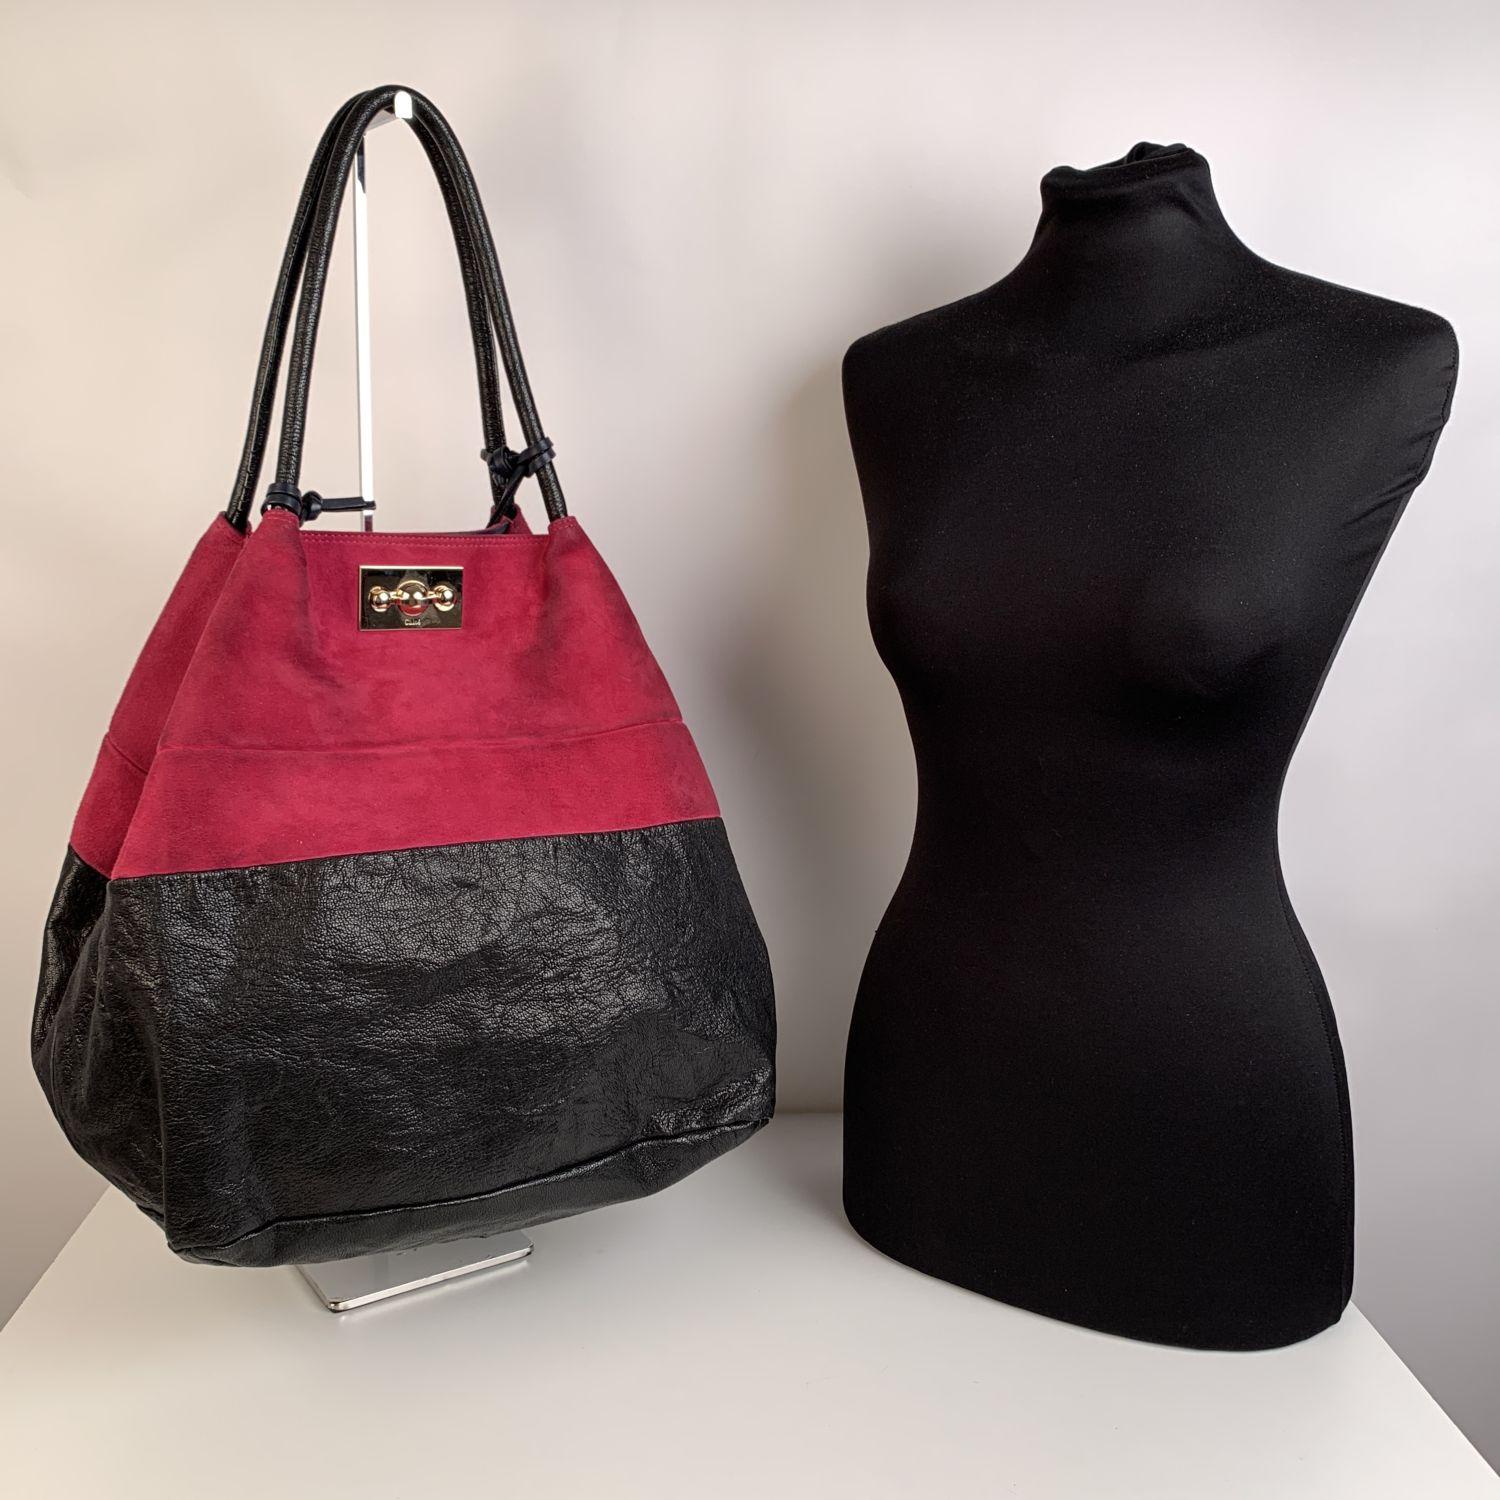 Large Chloe color block tote bag, crafted in black leather and magenta suede. Gold metal hardware. Double shoulder strap with tassels detailing. Front twist lock closure. The interior of the bag is in fabric with a zip pocket and an open pocket.